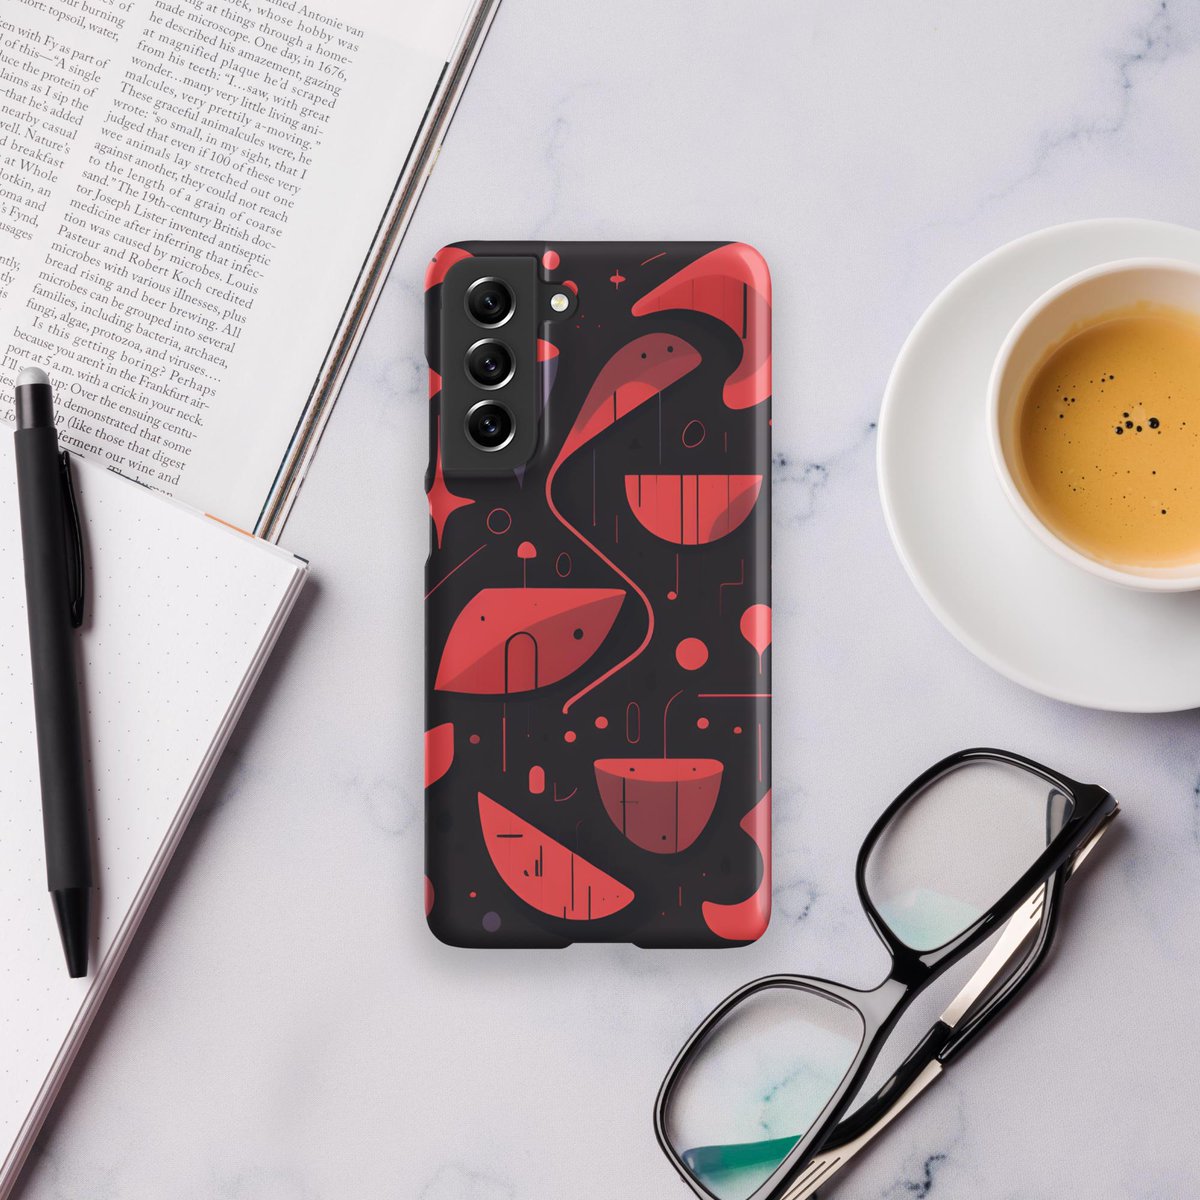 Do you enjoy minimalistic designs? 😌

Print this simplistic yet fascinating design on your own phone case! Or create your own design, with our super easy workflow!

Snap Case, EUR 23,95
faeforge.com/featured-2vtyos

#phonecase #phonecover #minimaliststyle #MinimalistDesign #TechStyle